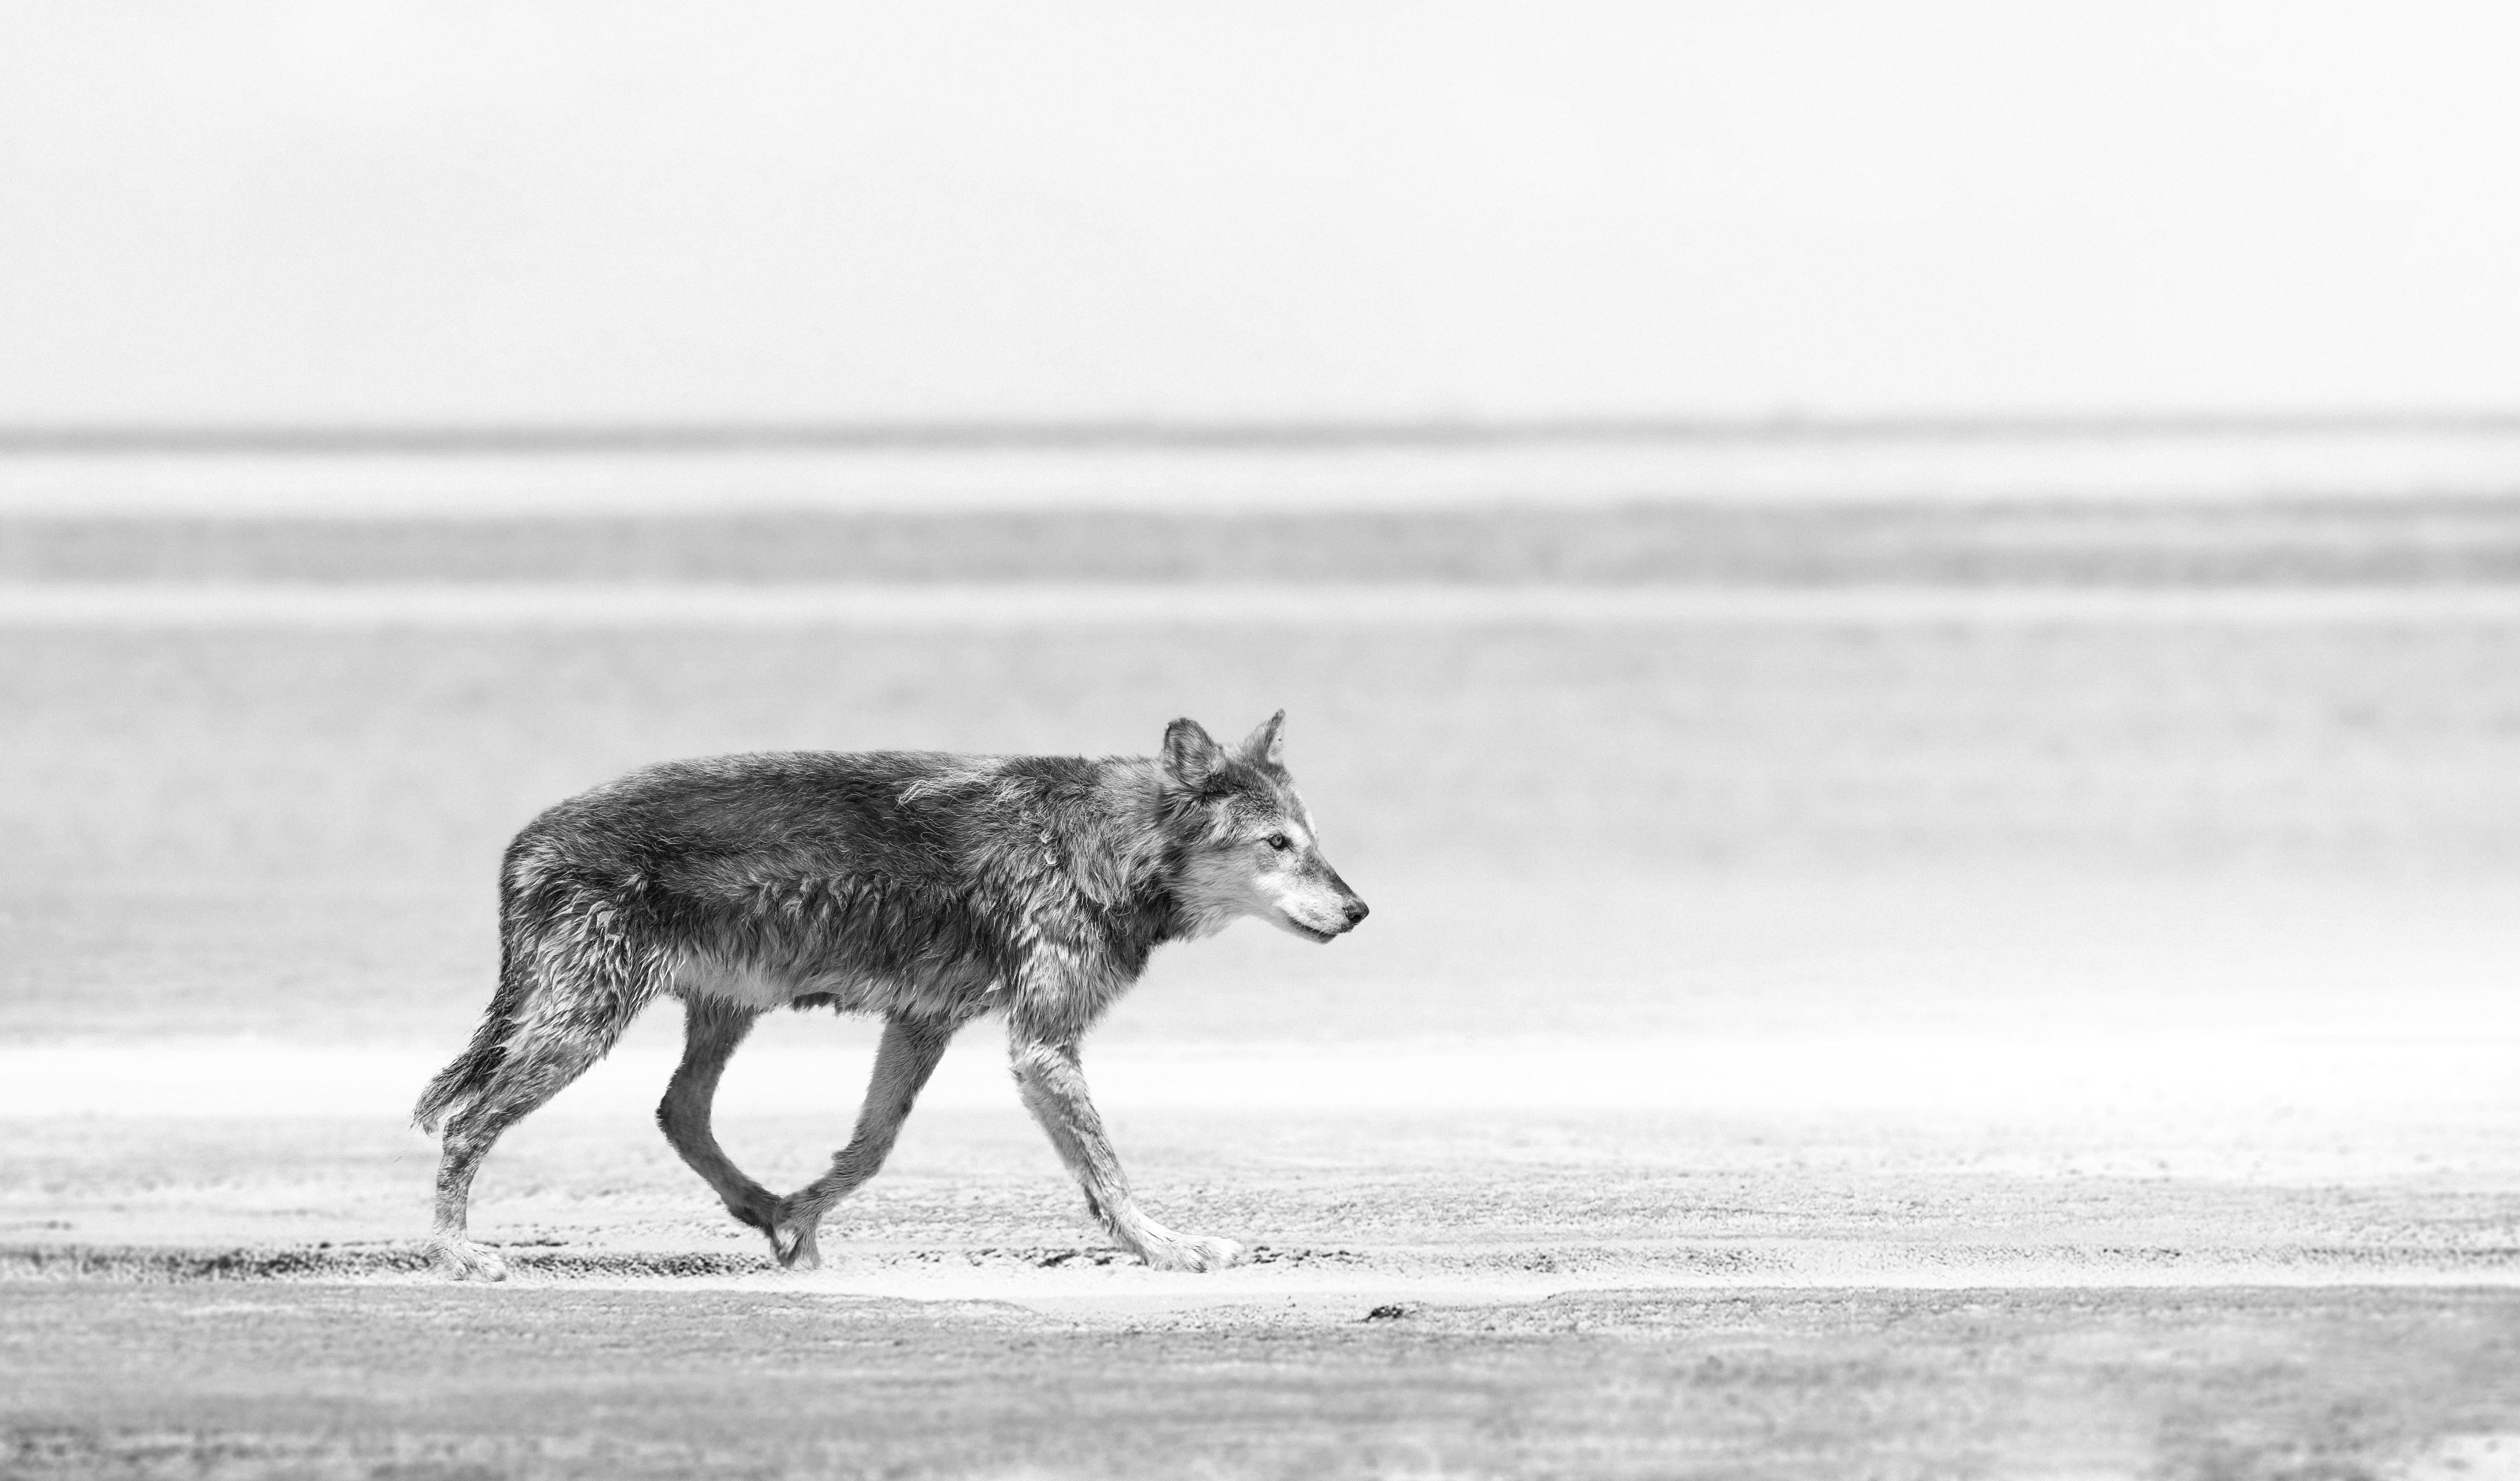 Shane Russeck Animal Print - "Sea Wolf" 30x60  Black and White Wolf, Wolves, Photography Photograph Art